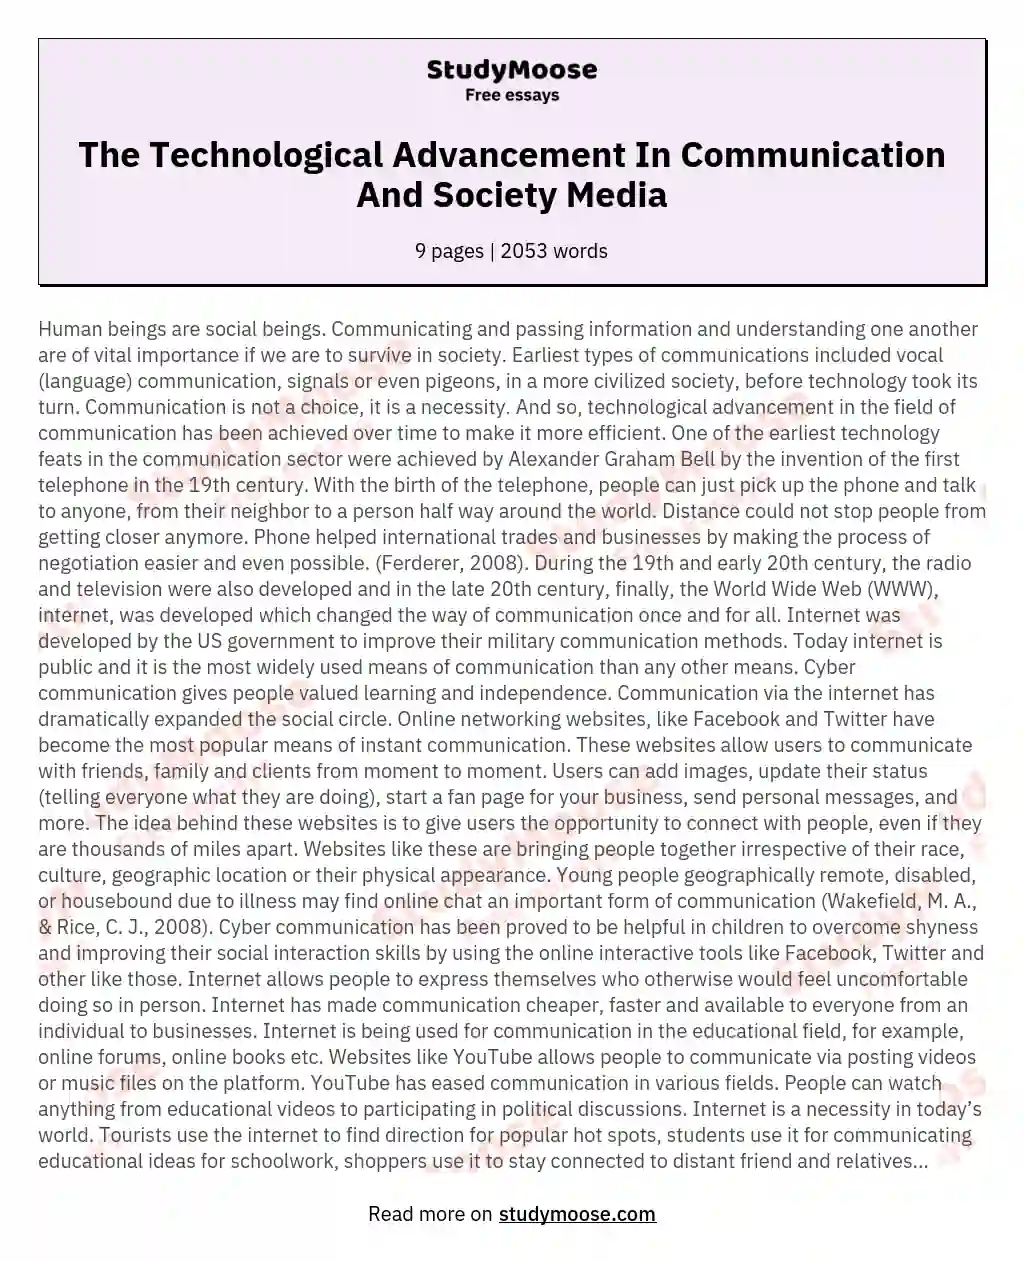 The Technological Advancement In Communication And Society Media essay